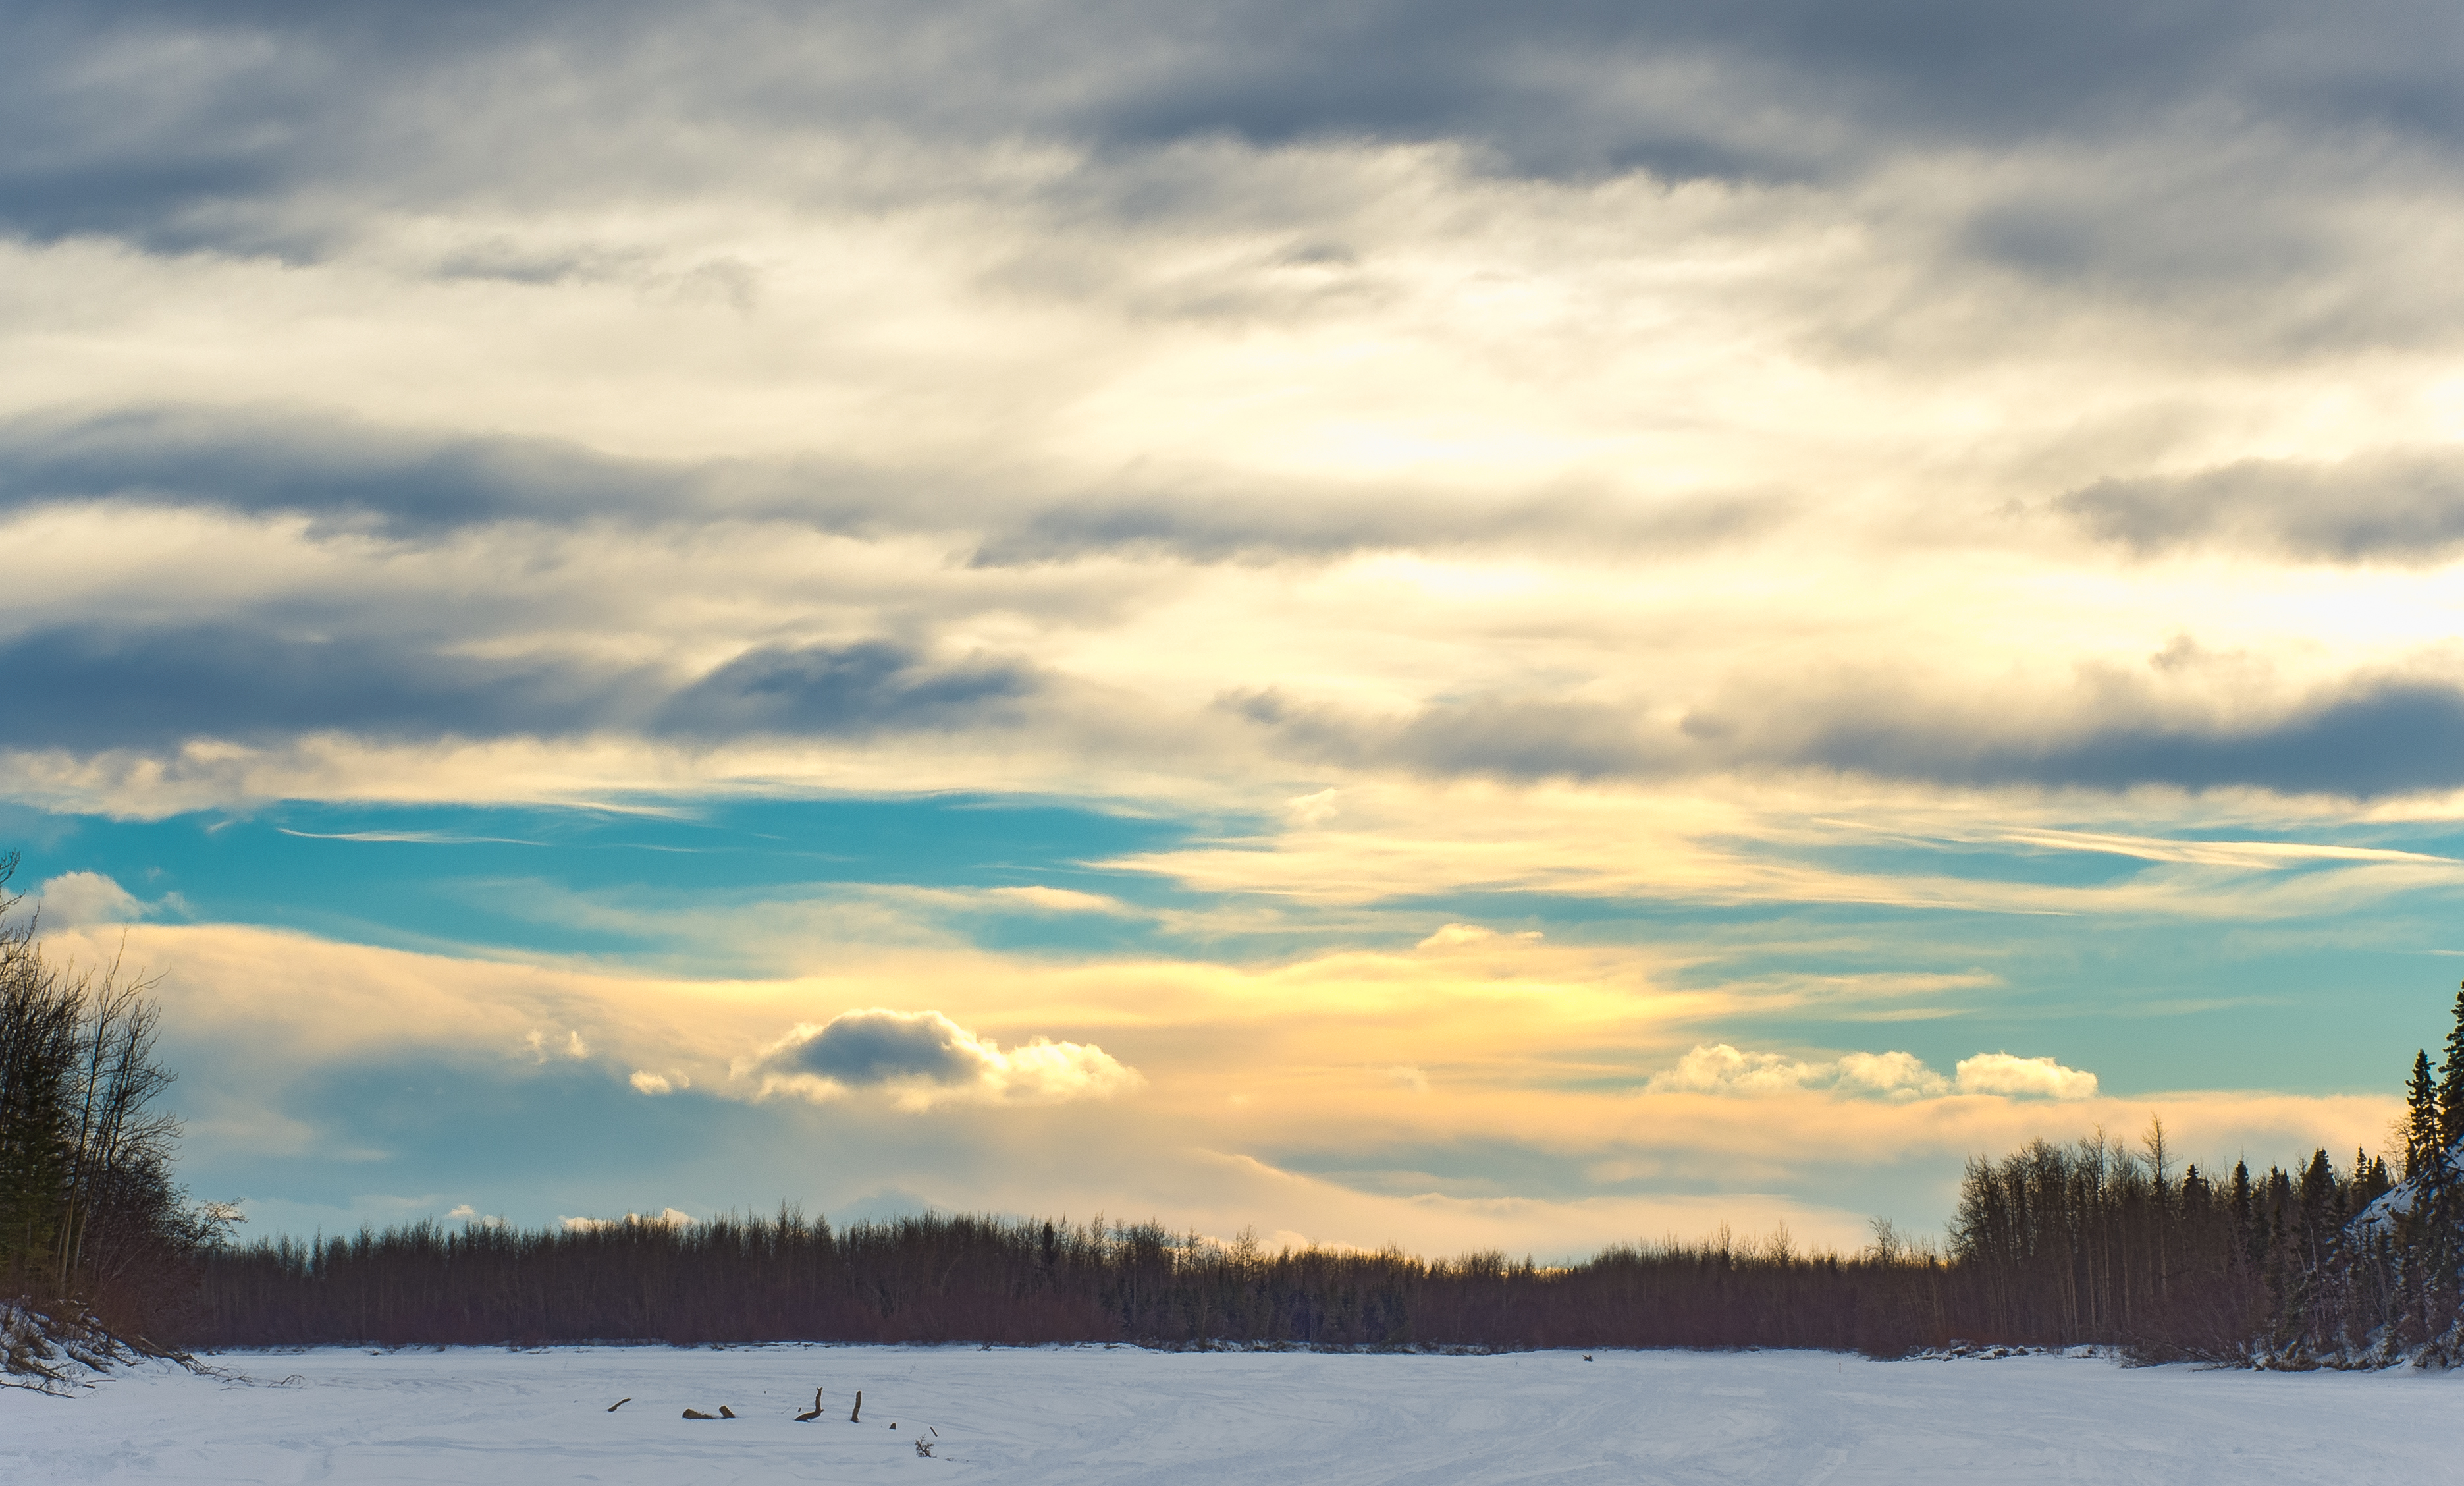 This was a typical late-winter sunset over the frozen Tanana River, a popular highway for mushers and skiiers outside of Fairbanks until the ice becomes unnavigable due to overflow sometime in April. From the Tanana River in Alaska.